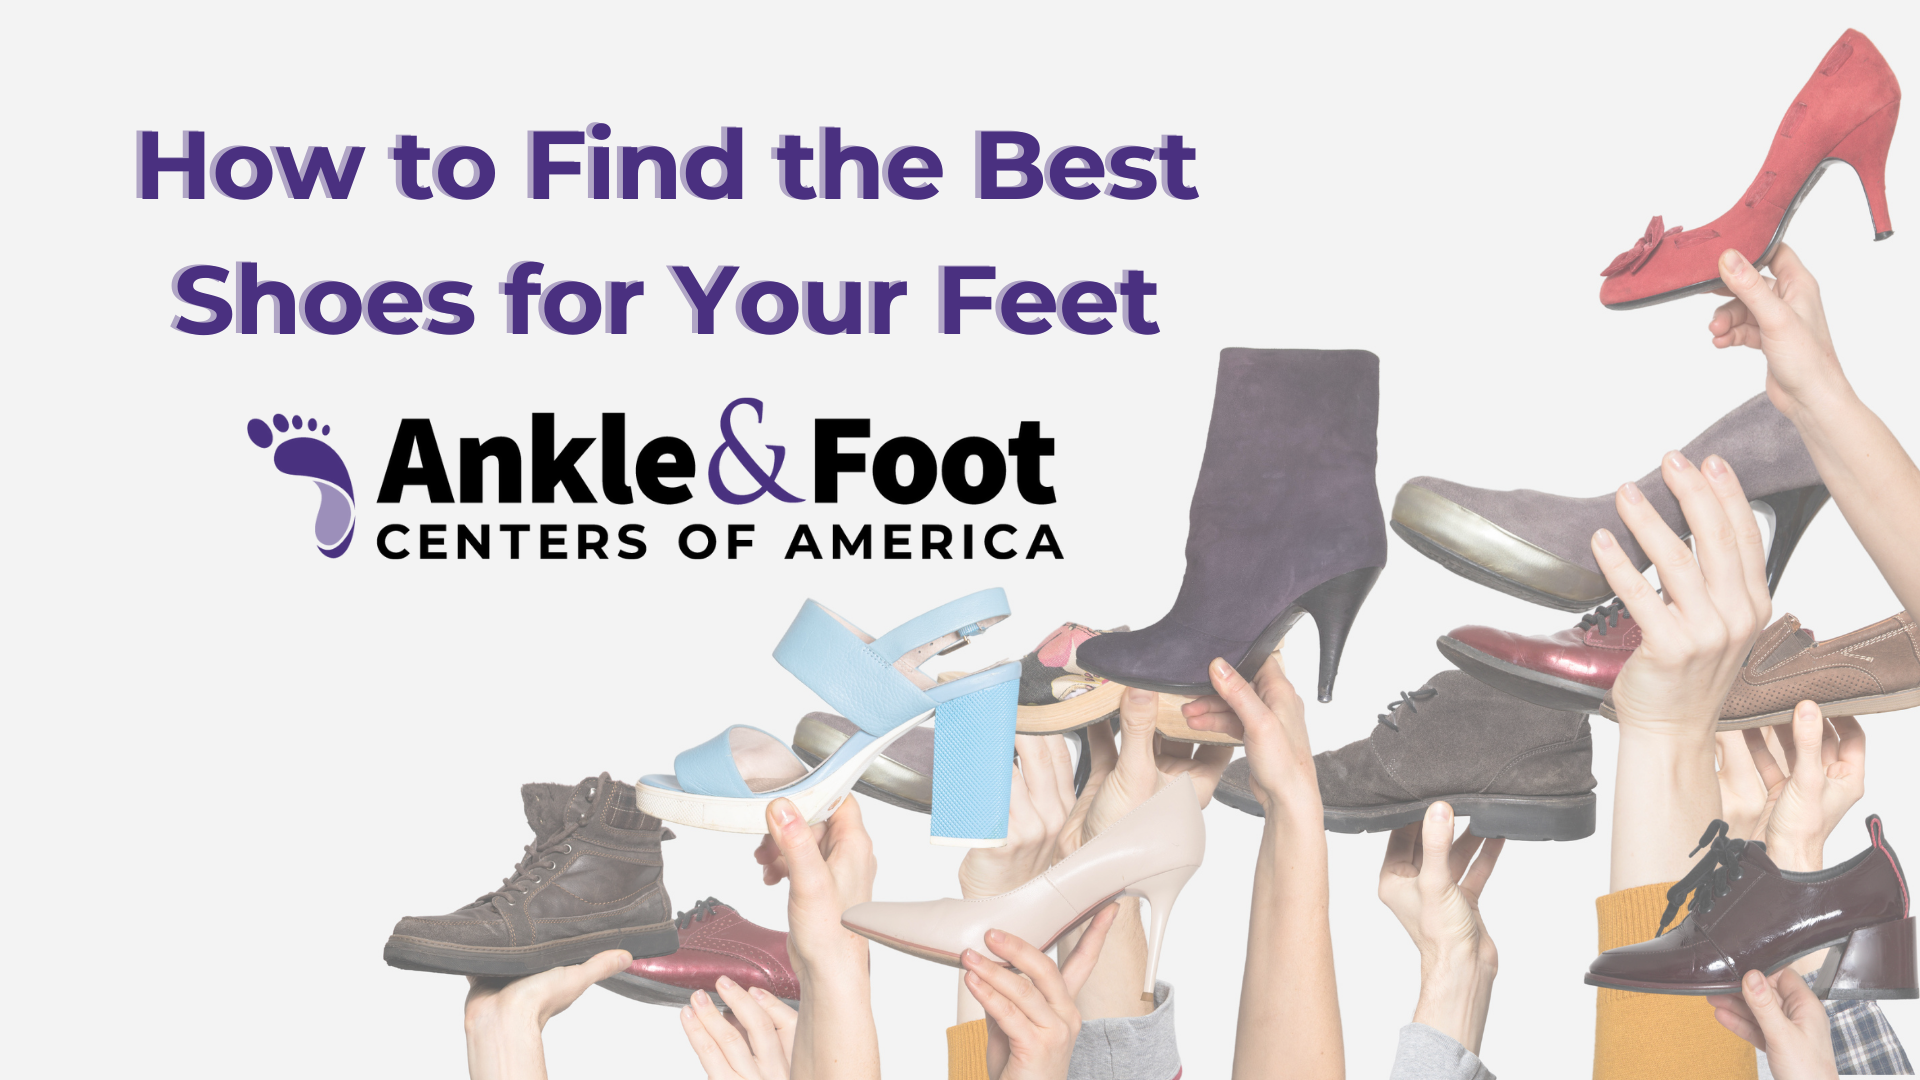 Find the Best Shoes For Your Feet